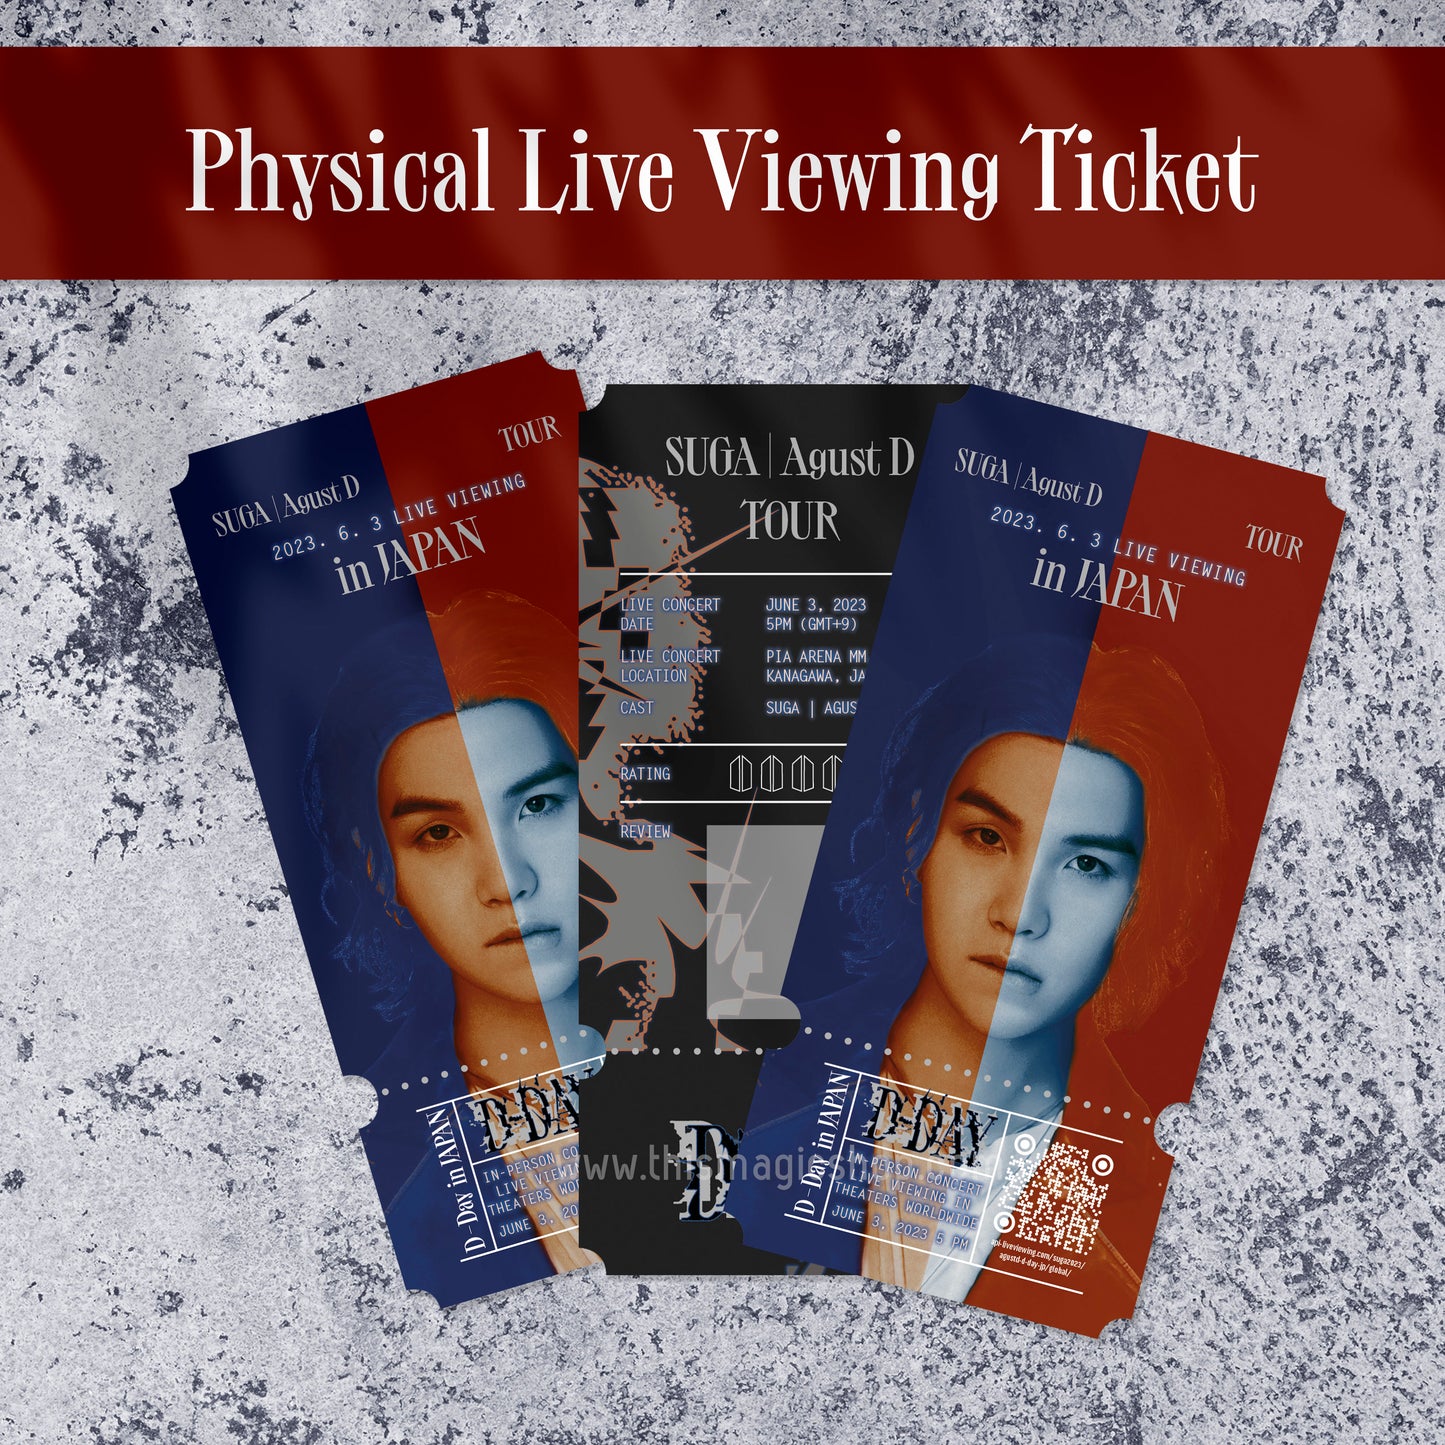 SUGA | AGUST D D-DAY cinema live viewing in japan TICKET commemorative ticket